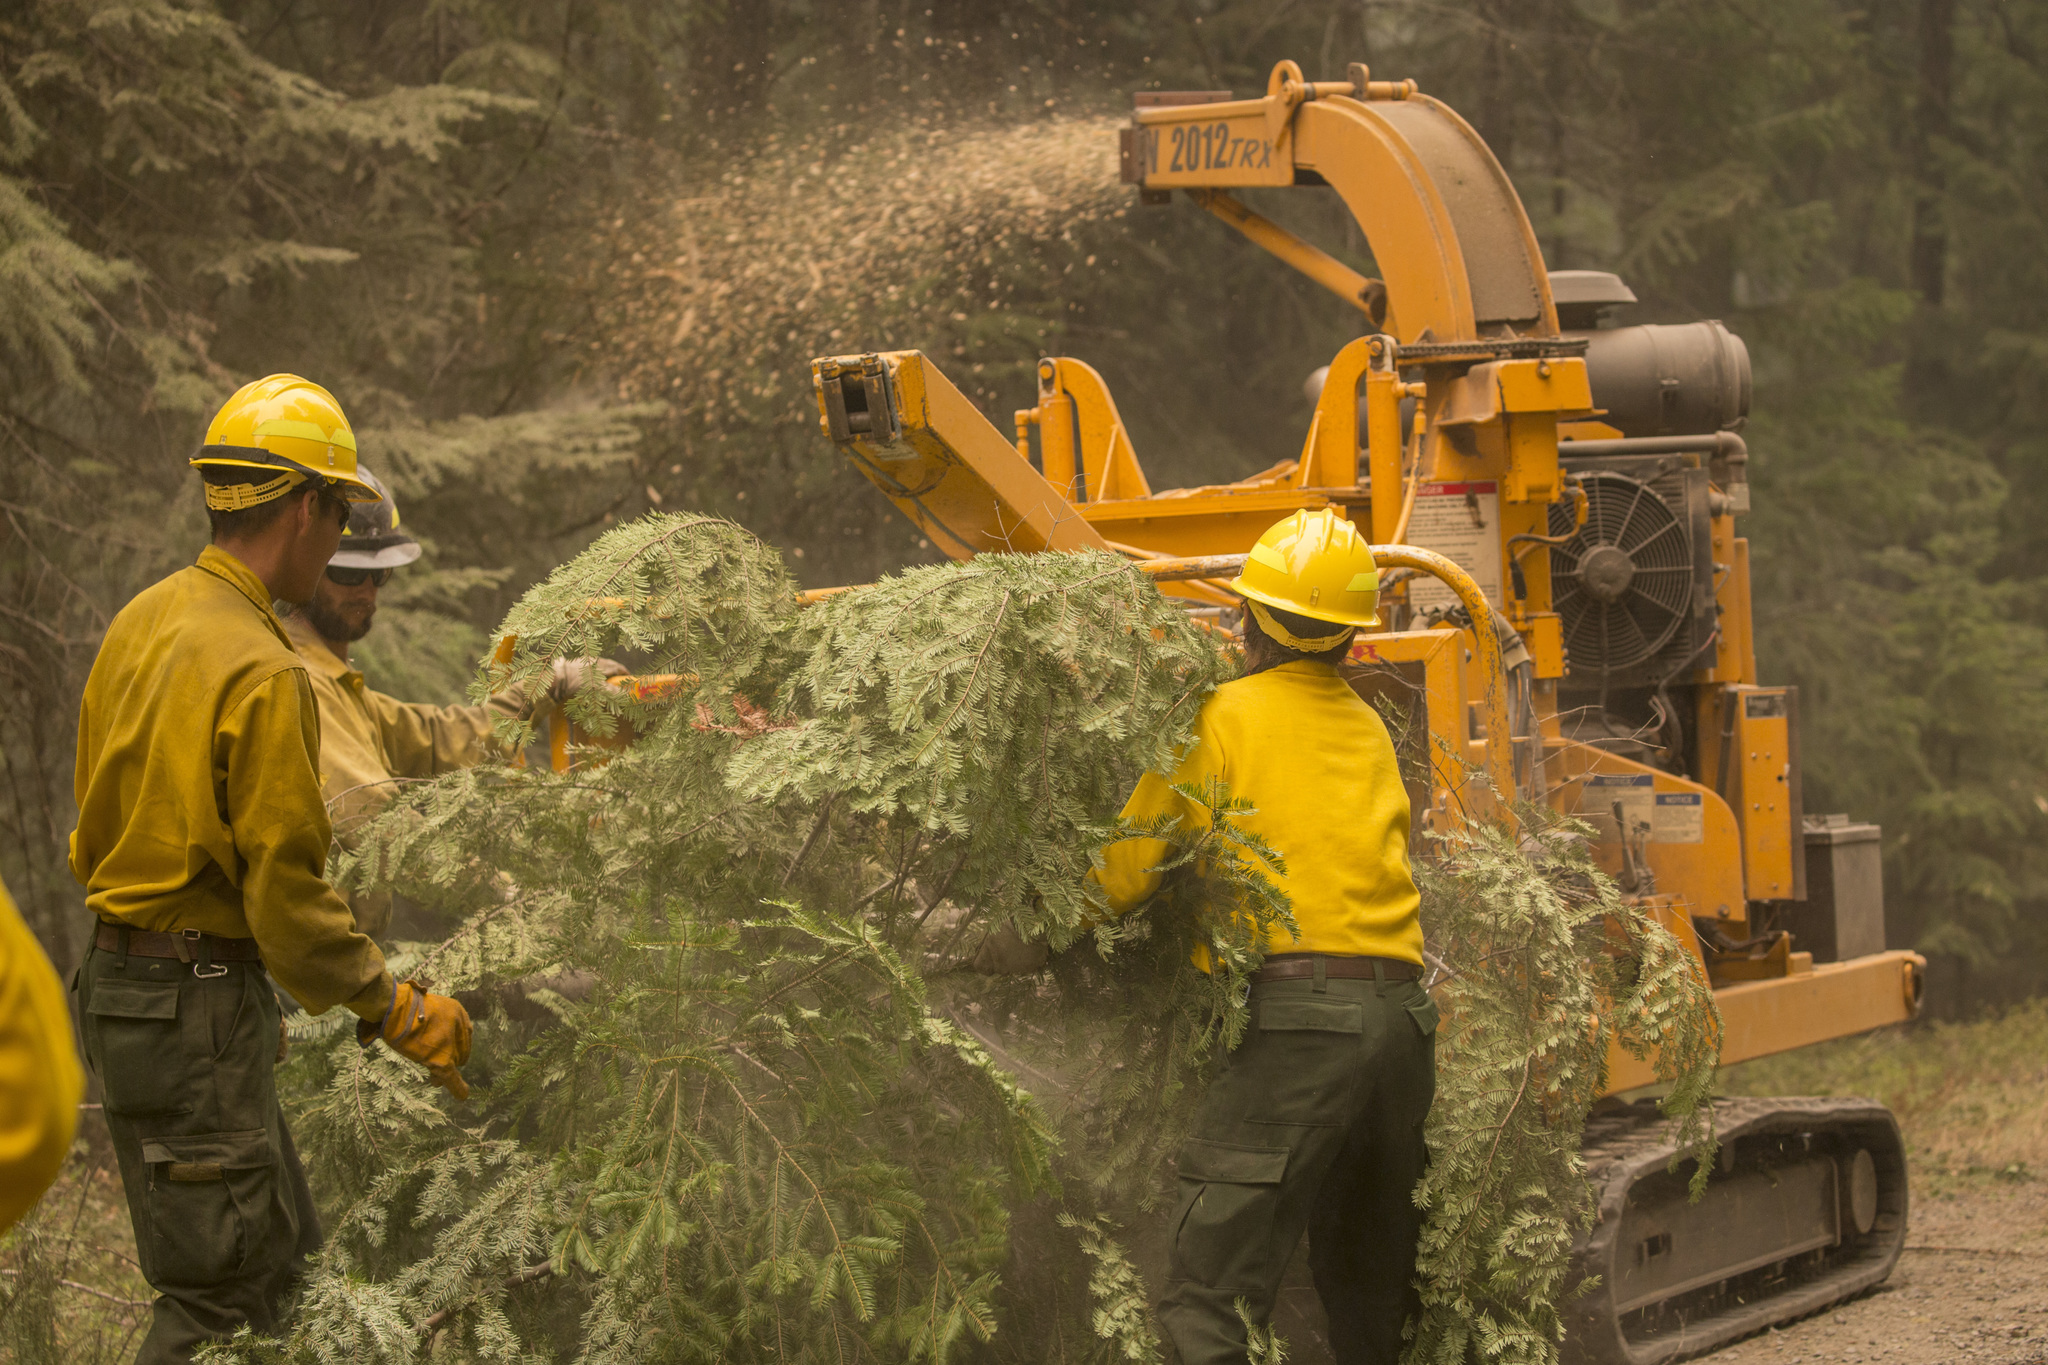 USDA Forest Service wildland firefighters putting a tree into a chipper. 